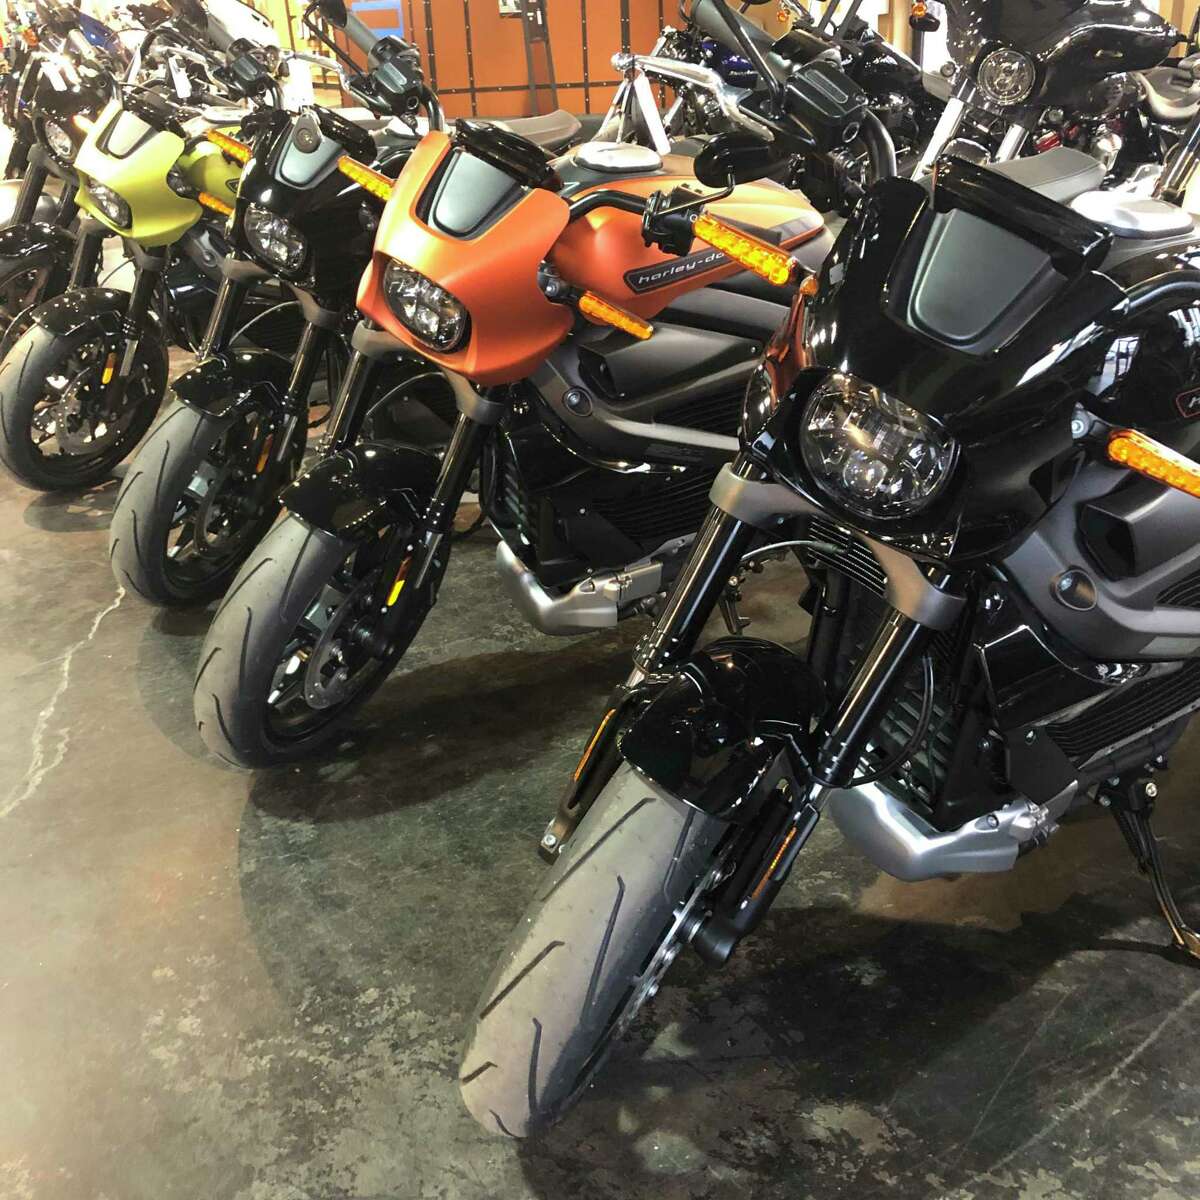 LiveWire electric motorcycles on display at the Harley Davidson dealership in Corpus Christi, Texas.